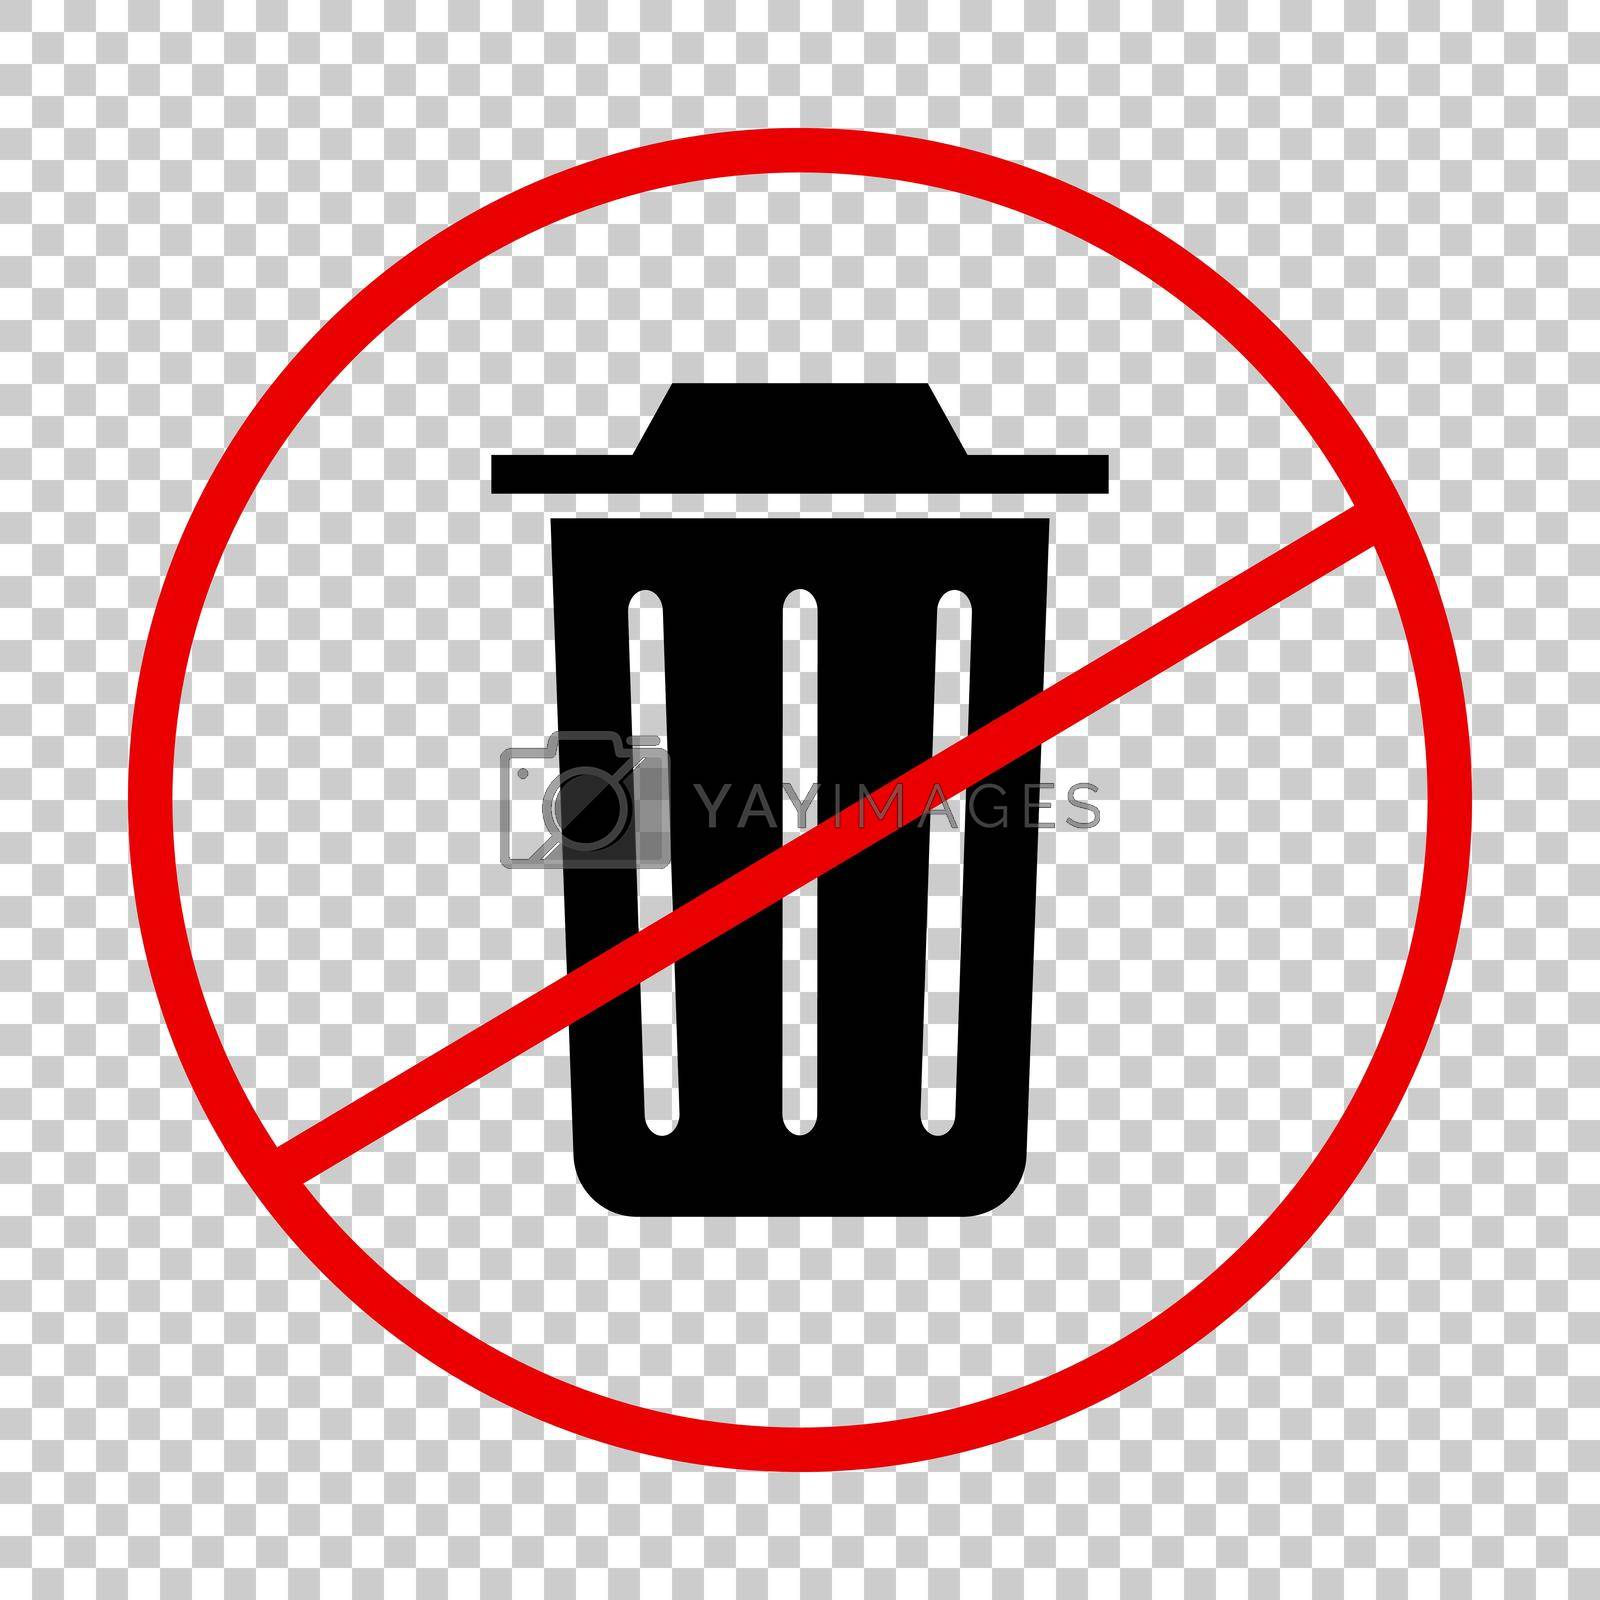 Royalty free image of Dustbin forbidden icon. Trash can ban sign. Vector. by illust_monster